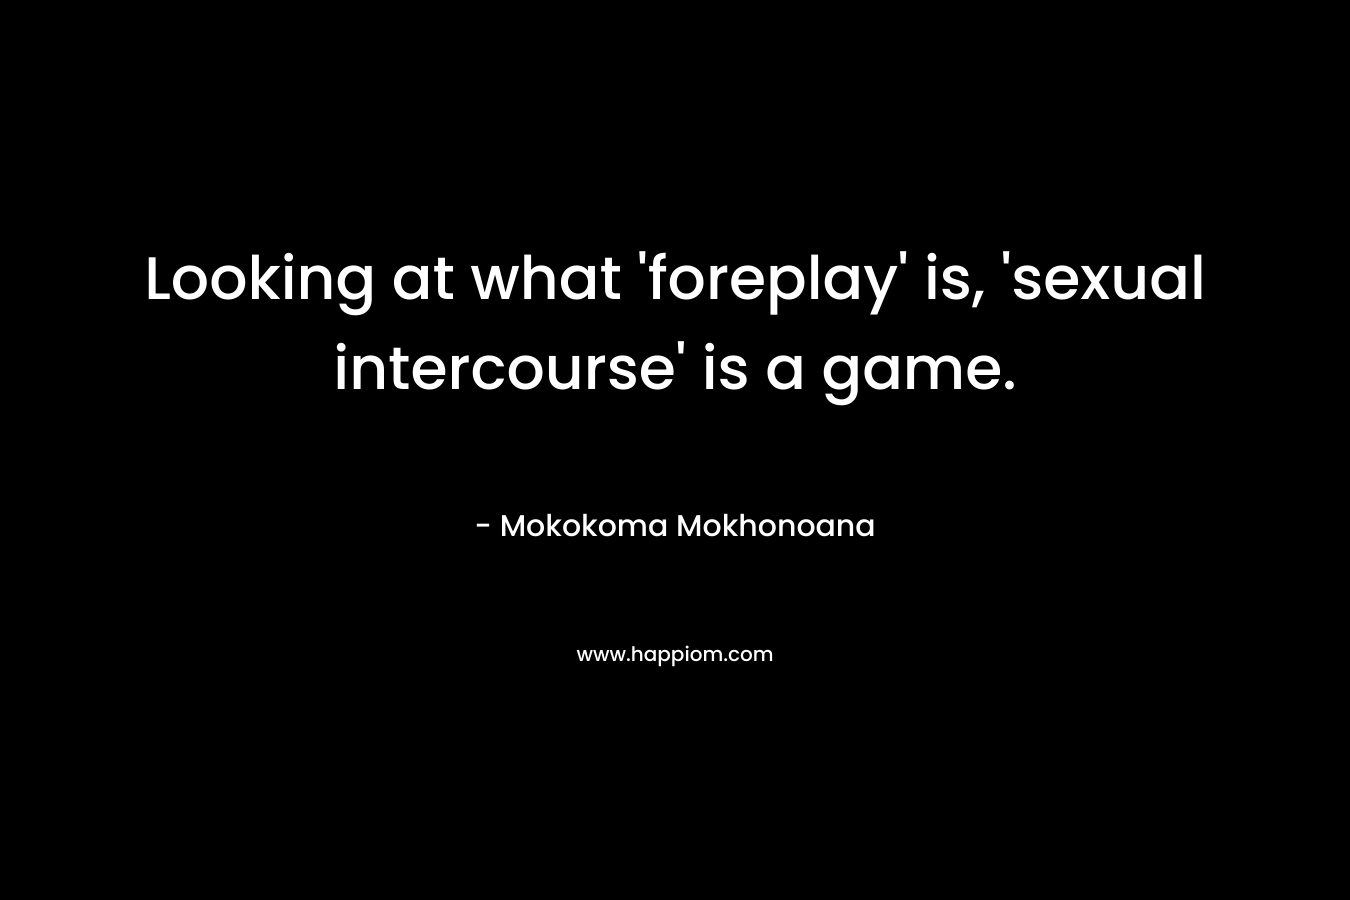 Looking at what ‘foreplay’ is, ‘sexual intercourse’ is a game. – Mokokoma Mokhonoana